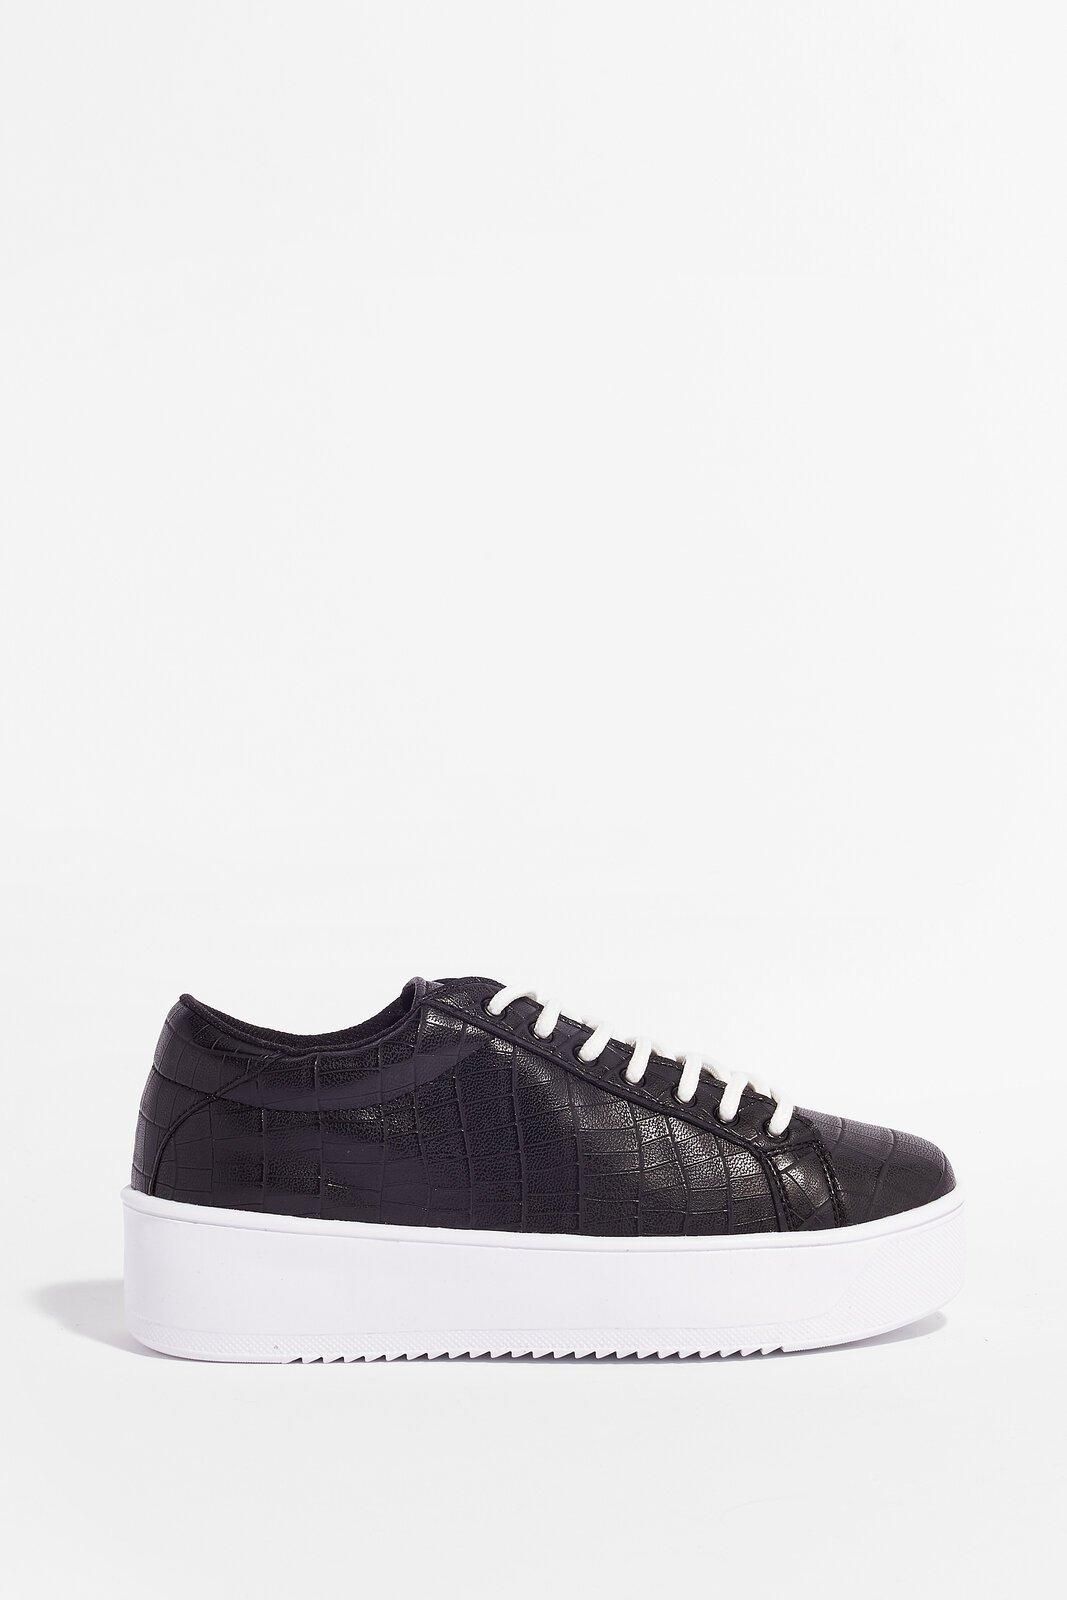 Womens Croc 'Em Out Faux Leather Platform Sneakers - Black | NastyGal (US & CA)